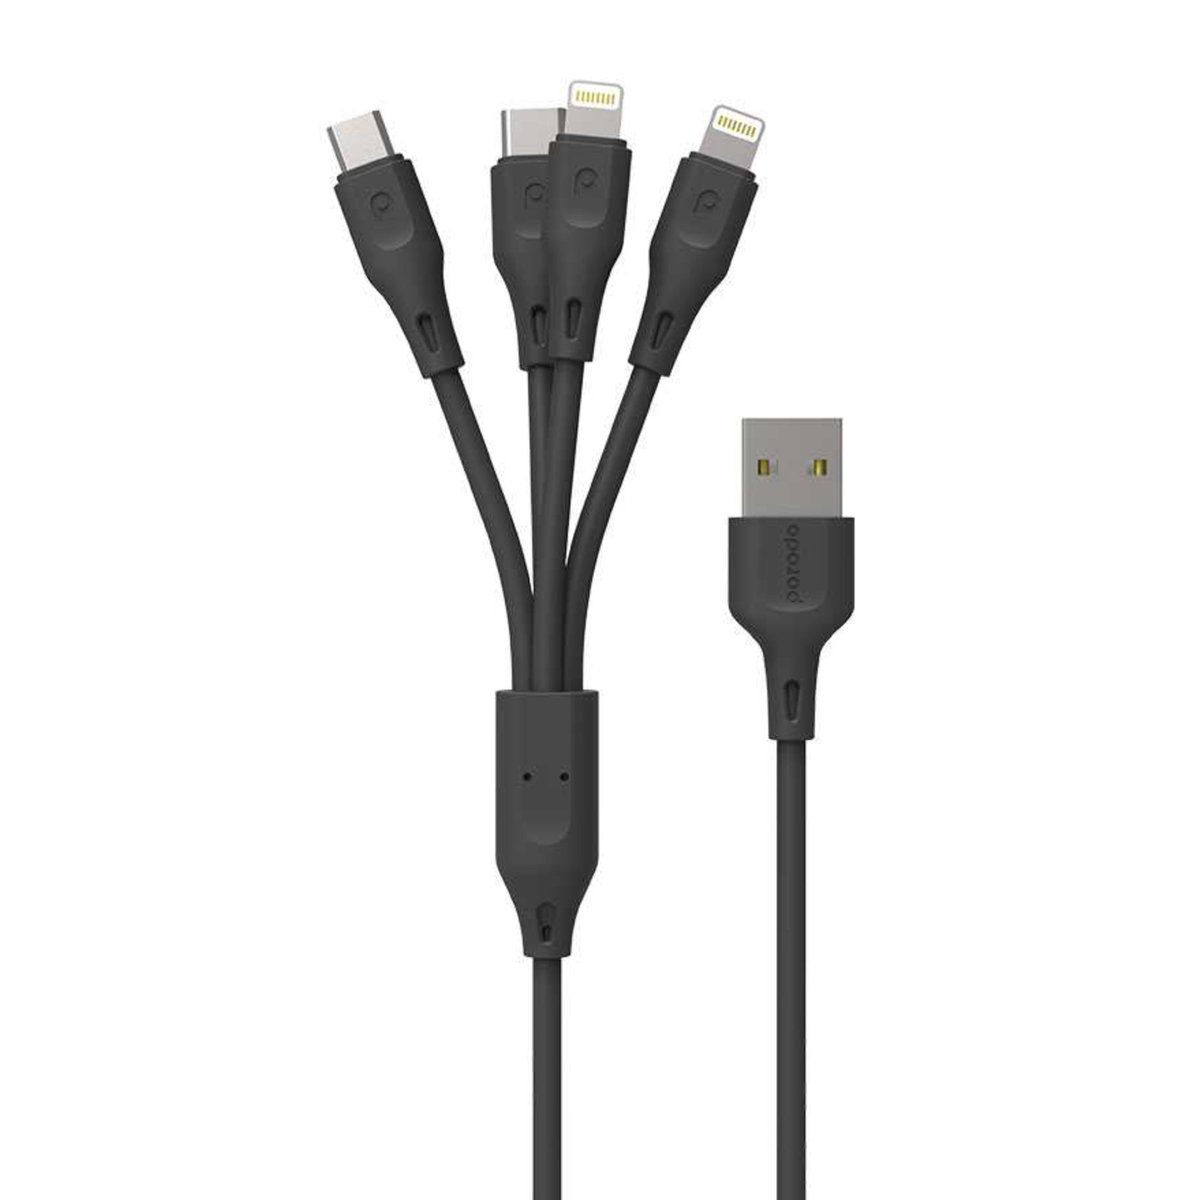 Porodo 3 in 1 Fast Charge Cable PD-41LLCM-BK Black